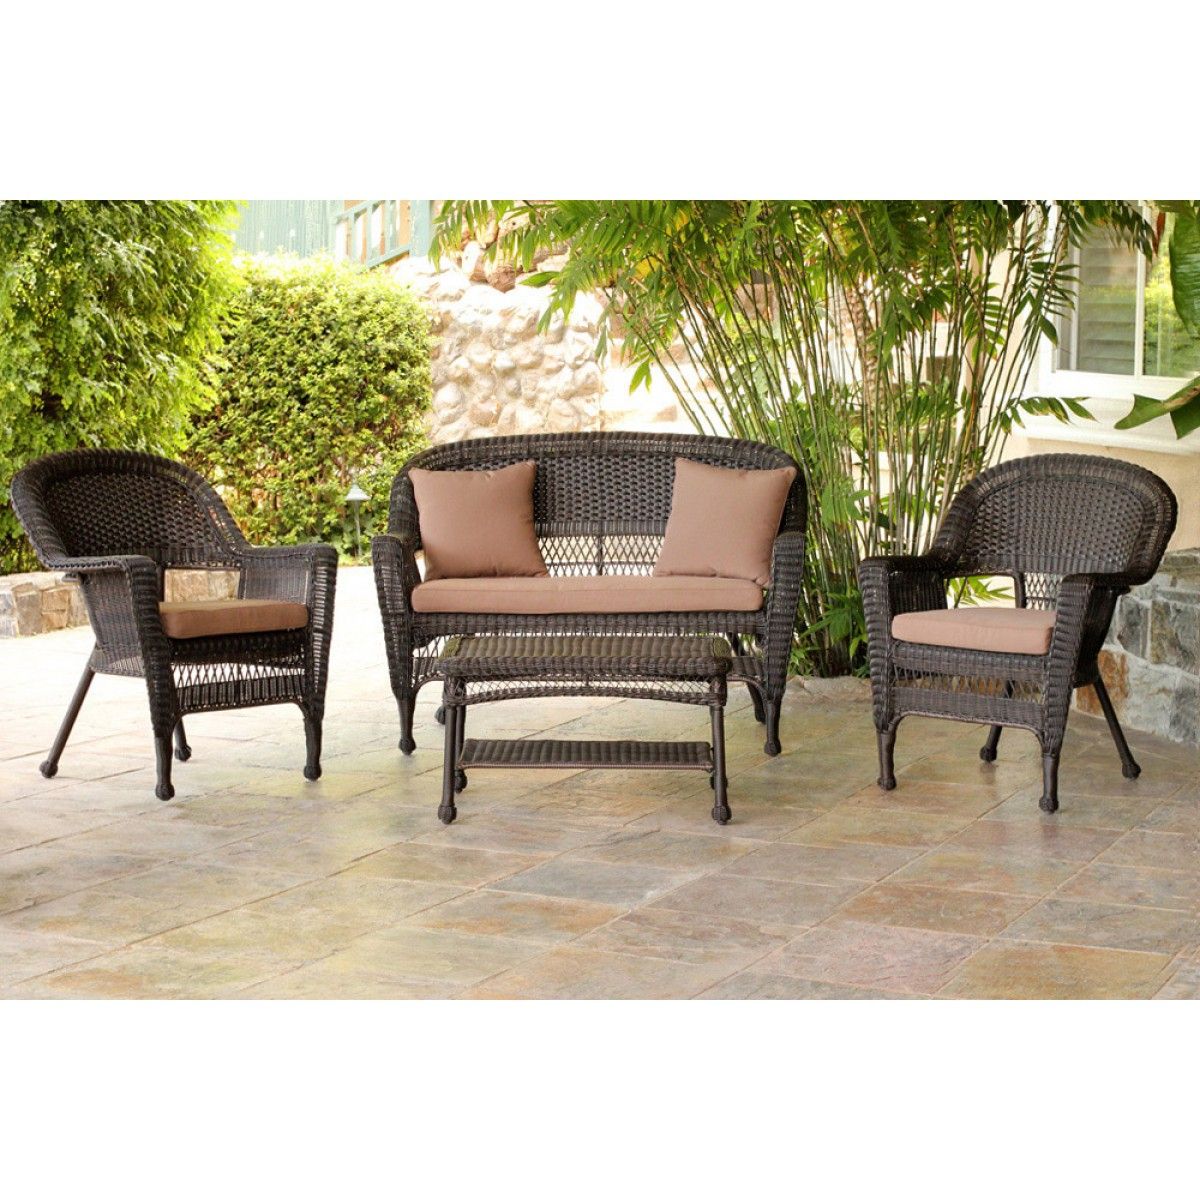 4pc Espresso Wicker Conversation Set – Brown Cushions Within Preferred Brown Patio Conversation Sets With Cushions (View 5 of 15)